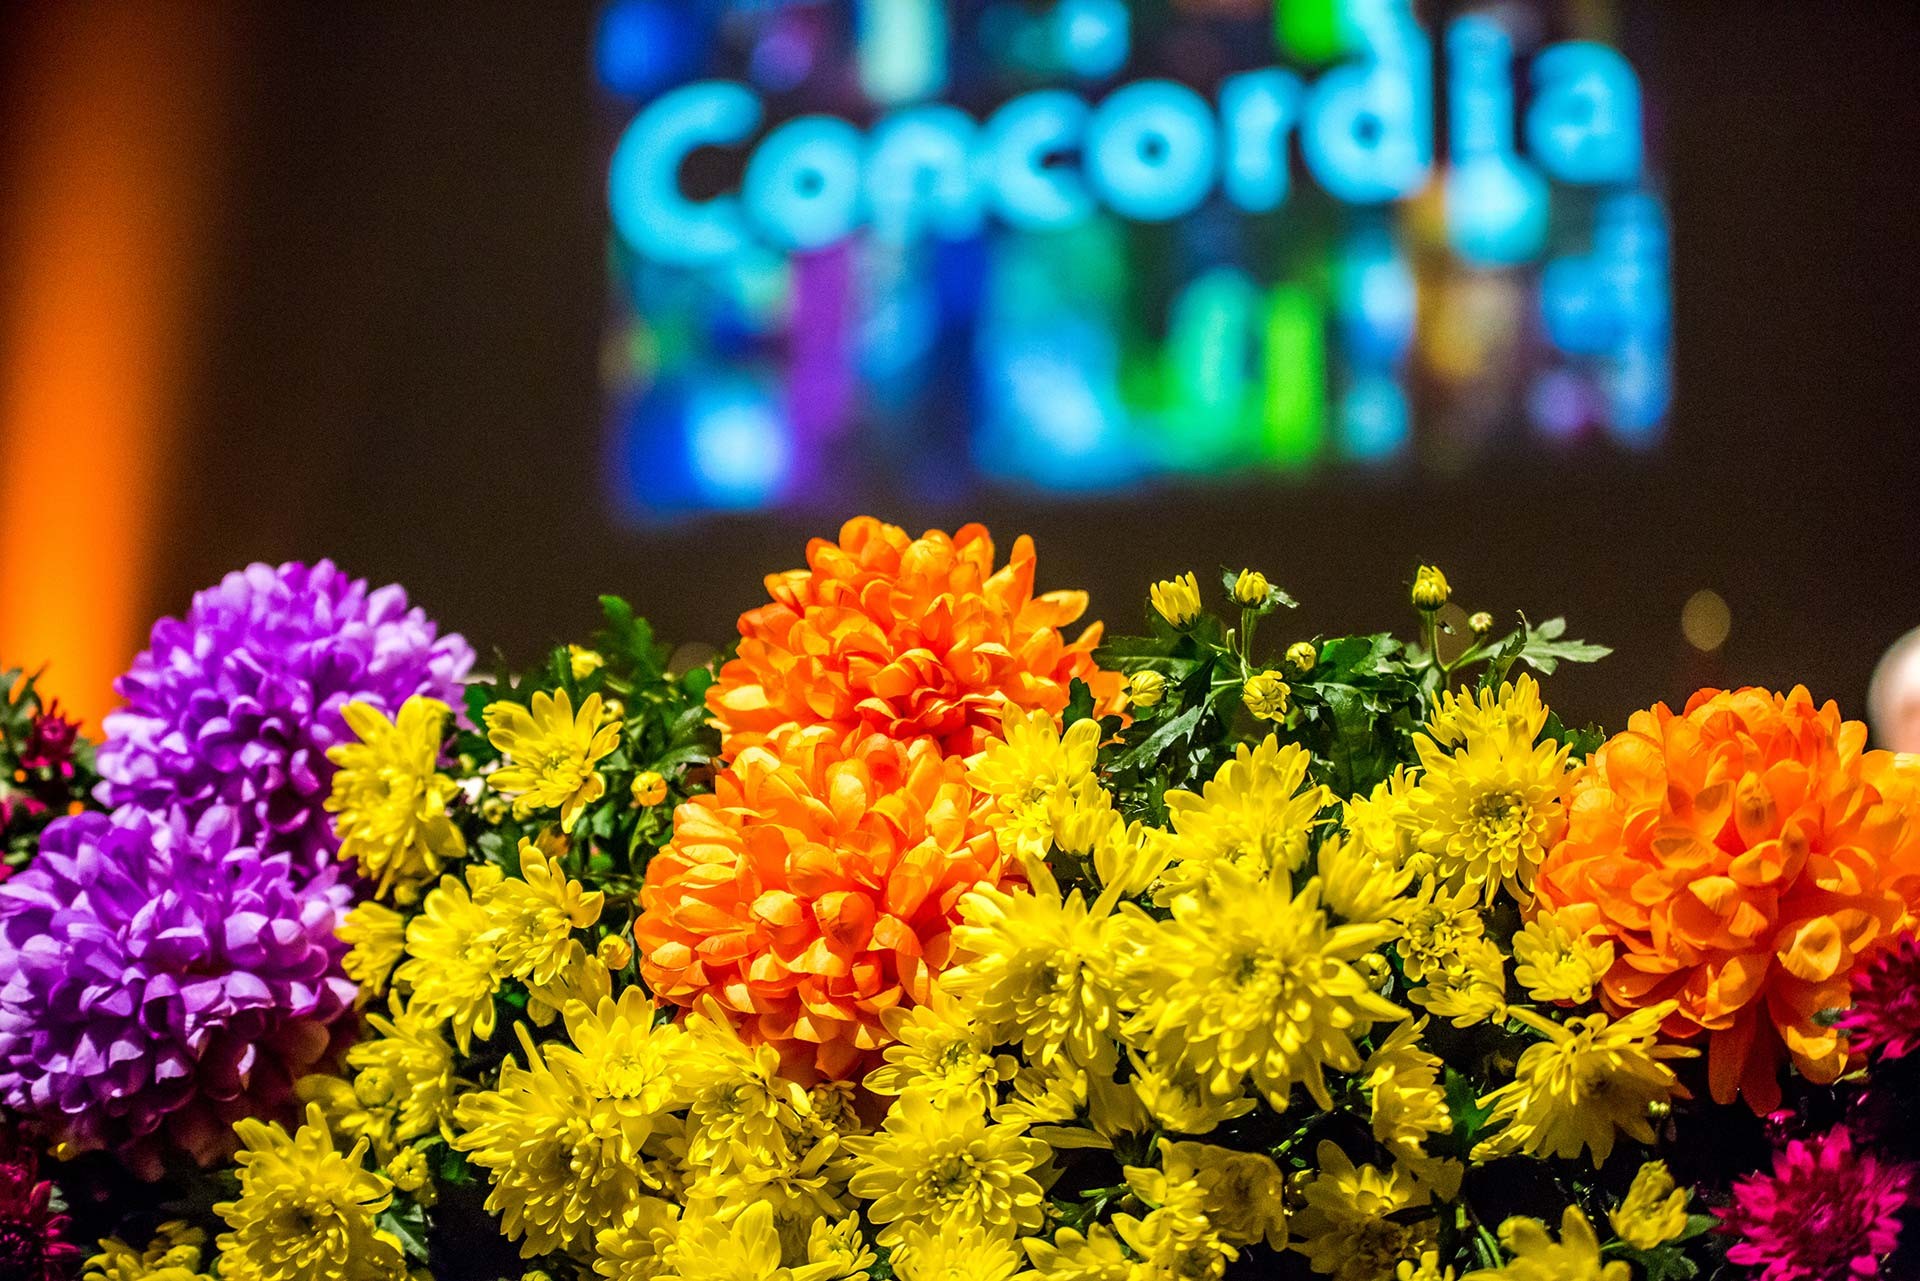 Close up of flowers at convocation with large screen in background that says Concordia.